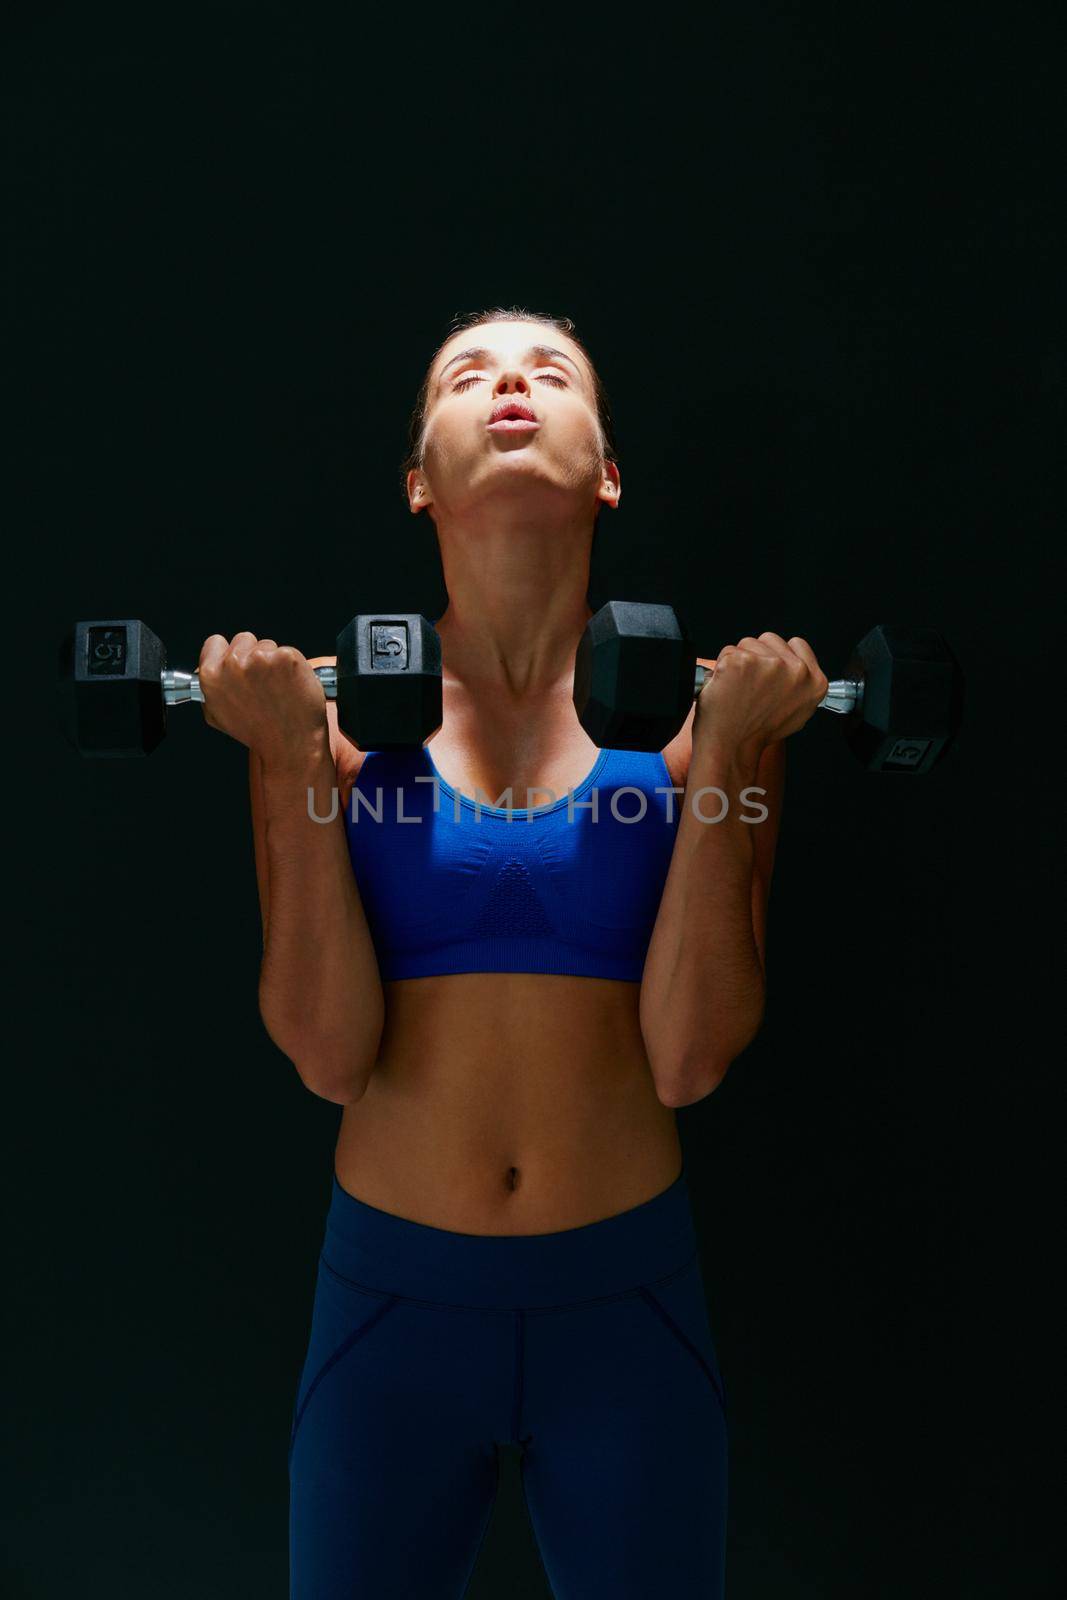 Hustle for your muscle. Studio shot of a fit young woman working out with weights against a dark background. by YuriArcurs